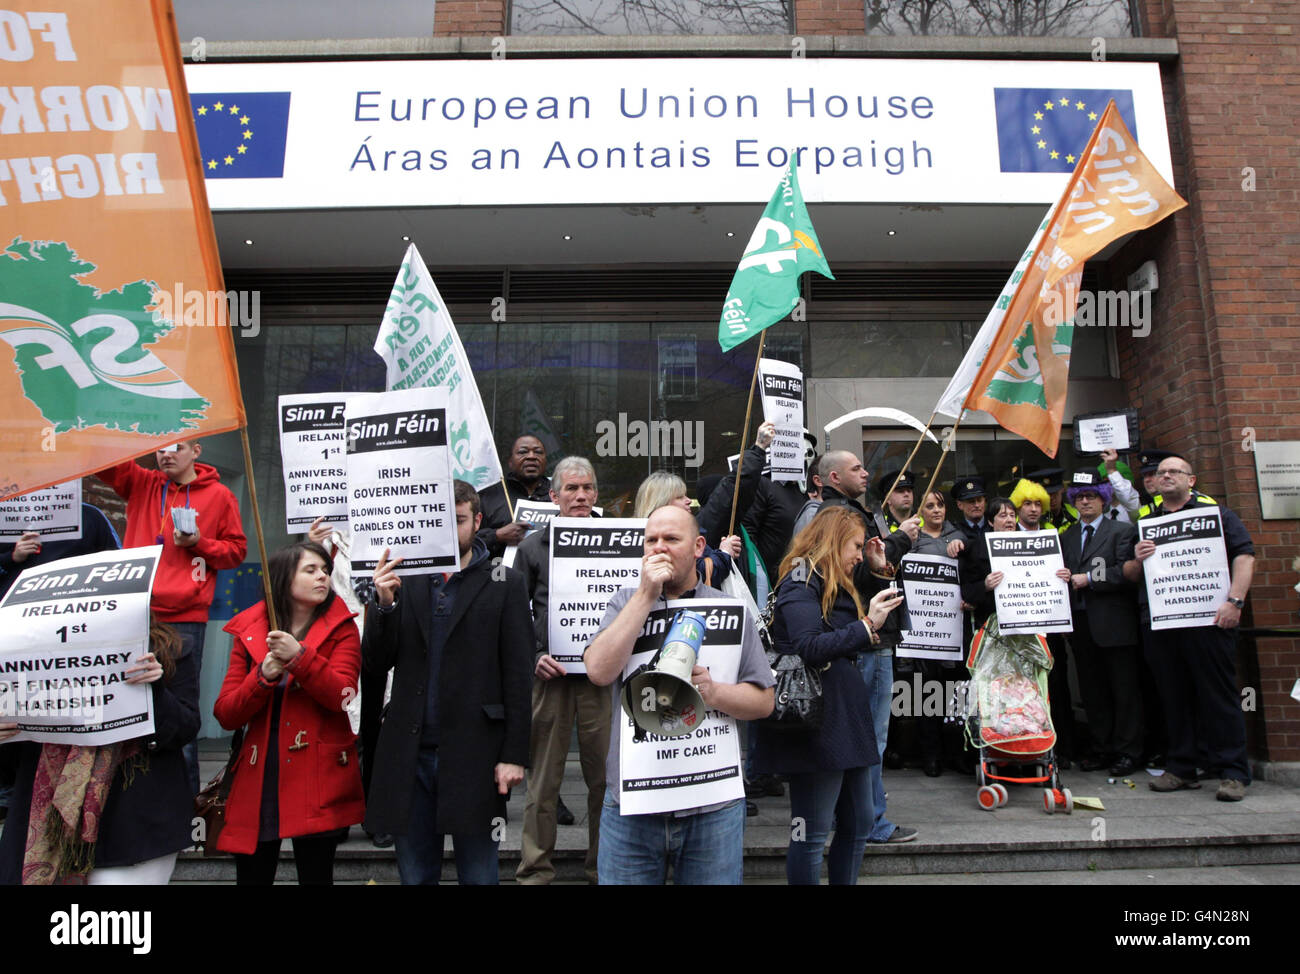 Sinn Fein activists mimicking IMF officials as they picket the European Union headquarters in Dublin as Ireland marks the one year anniversary of the EU/IMF bailout loan. Stock Photo